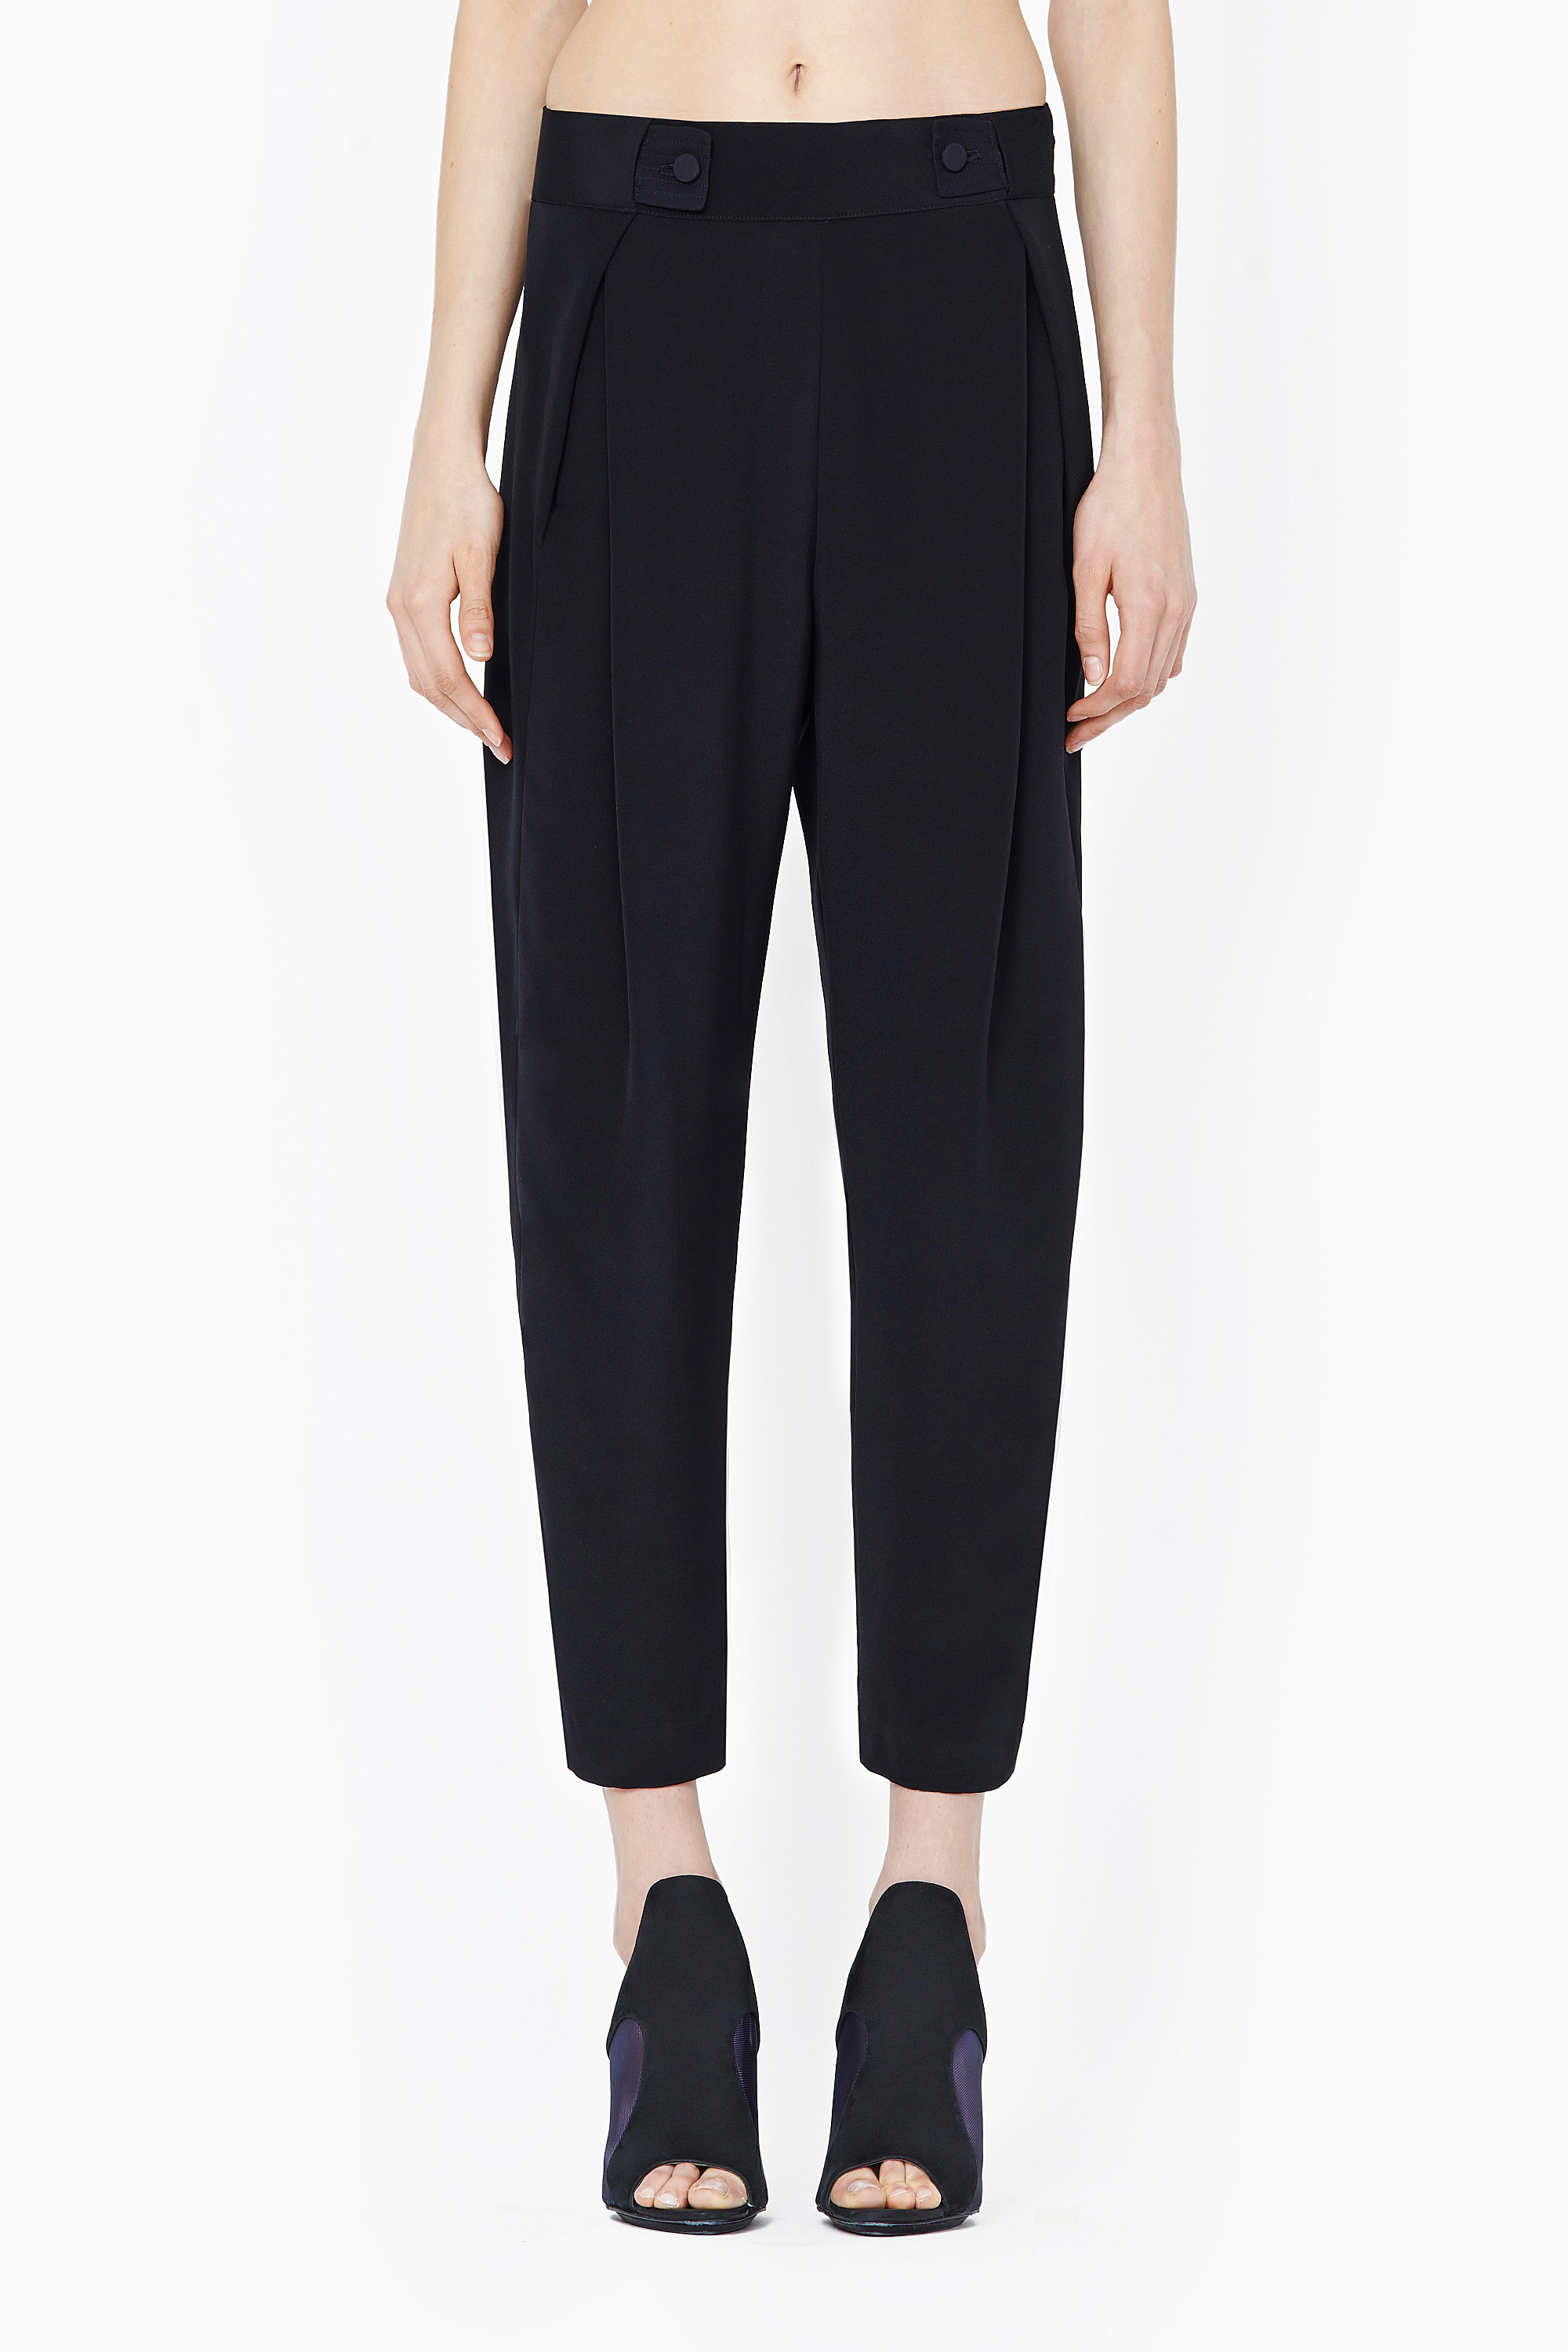 Lyst - 3.1 Phillip Lim Pant With Waist Tab Extension in Black